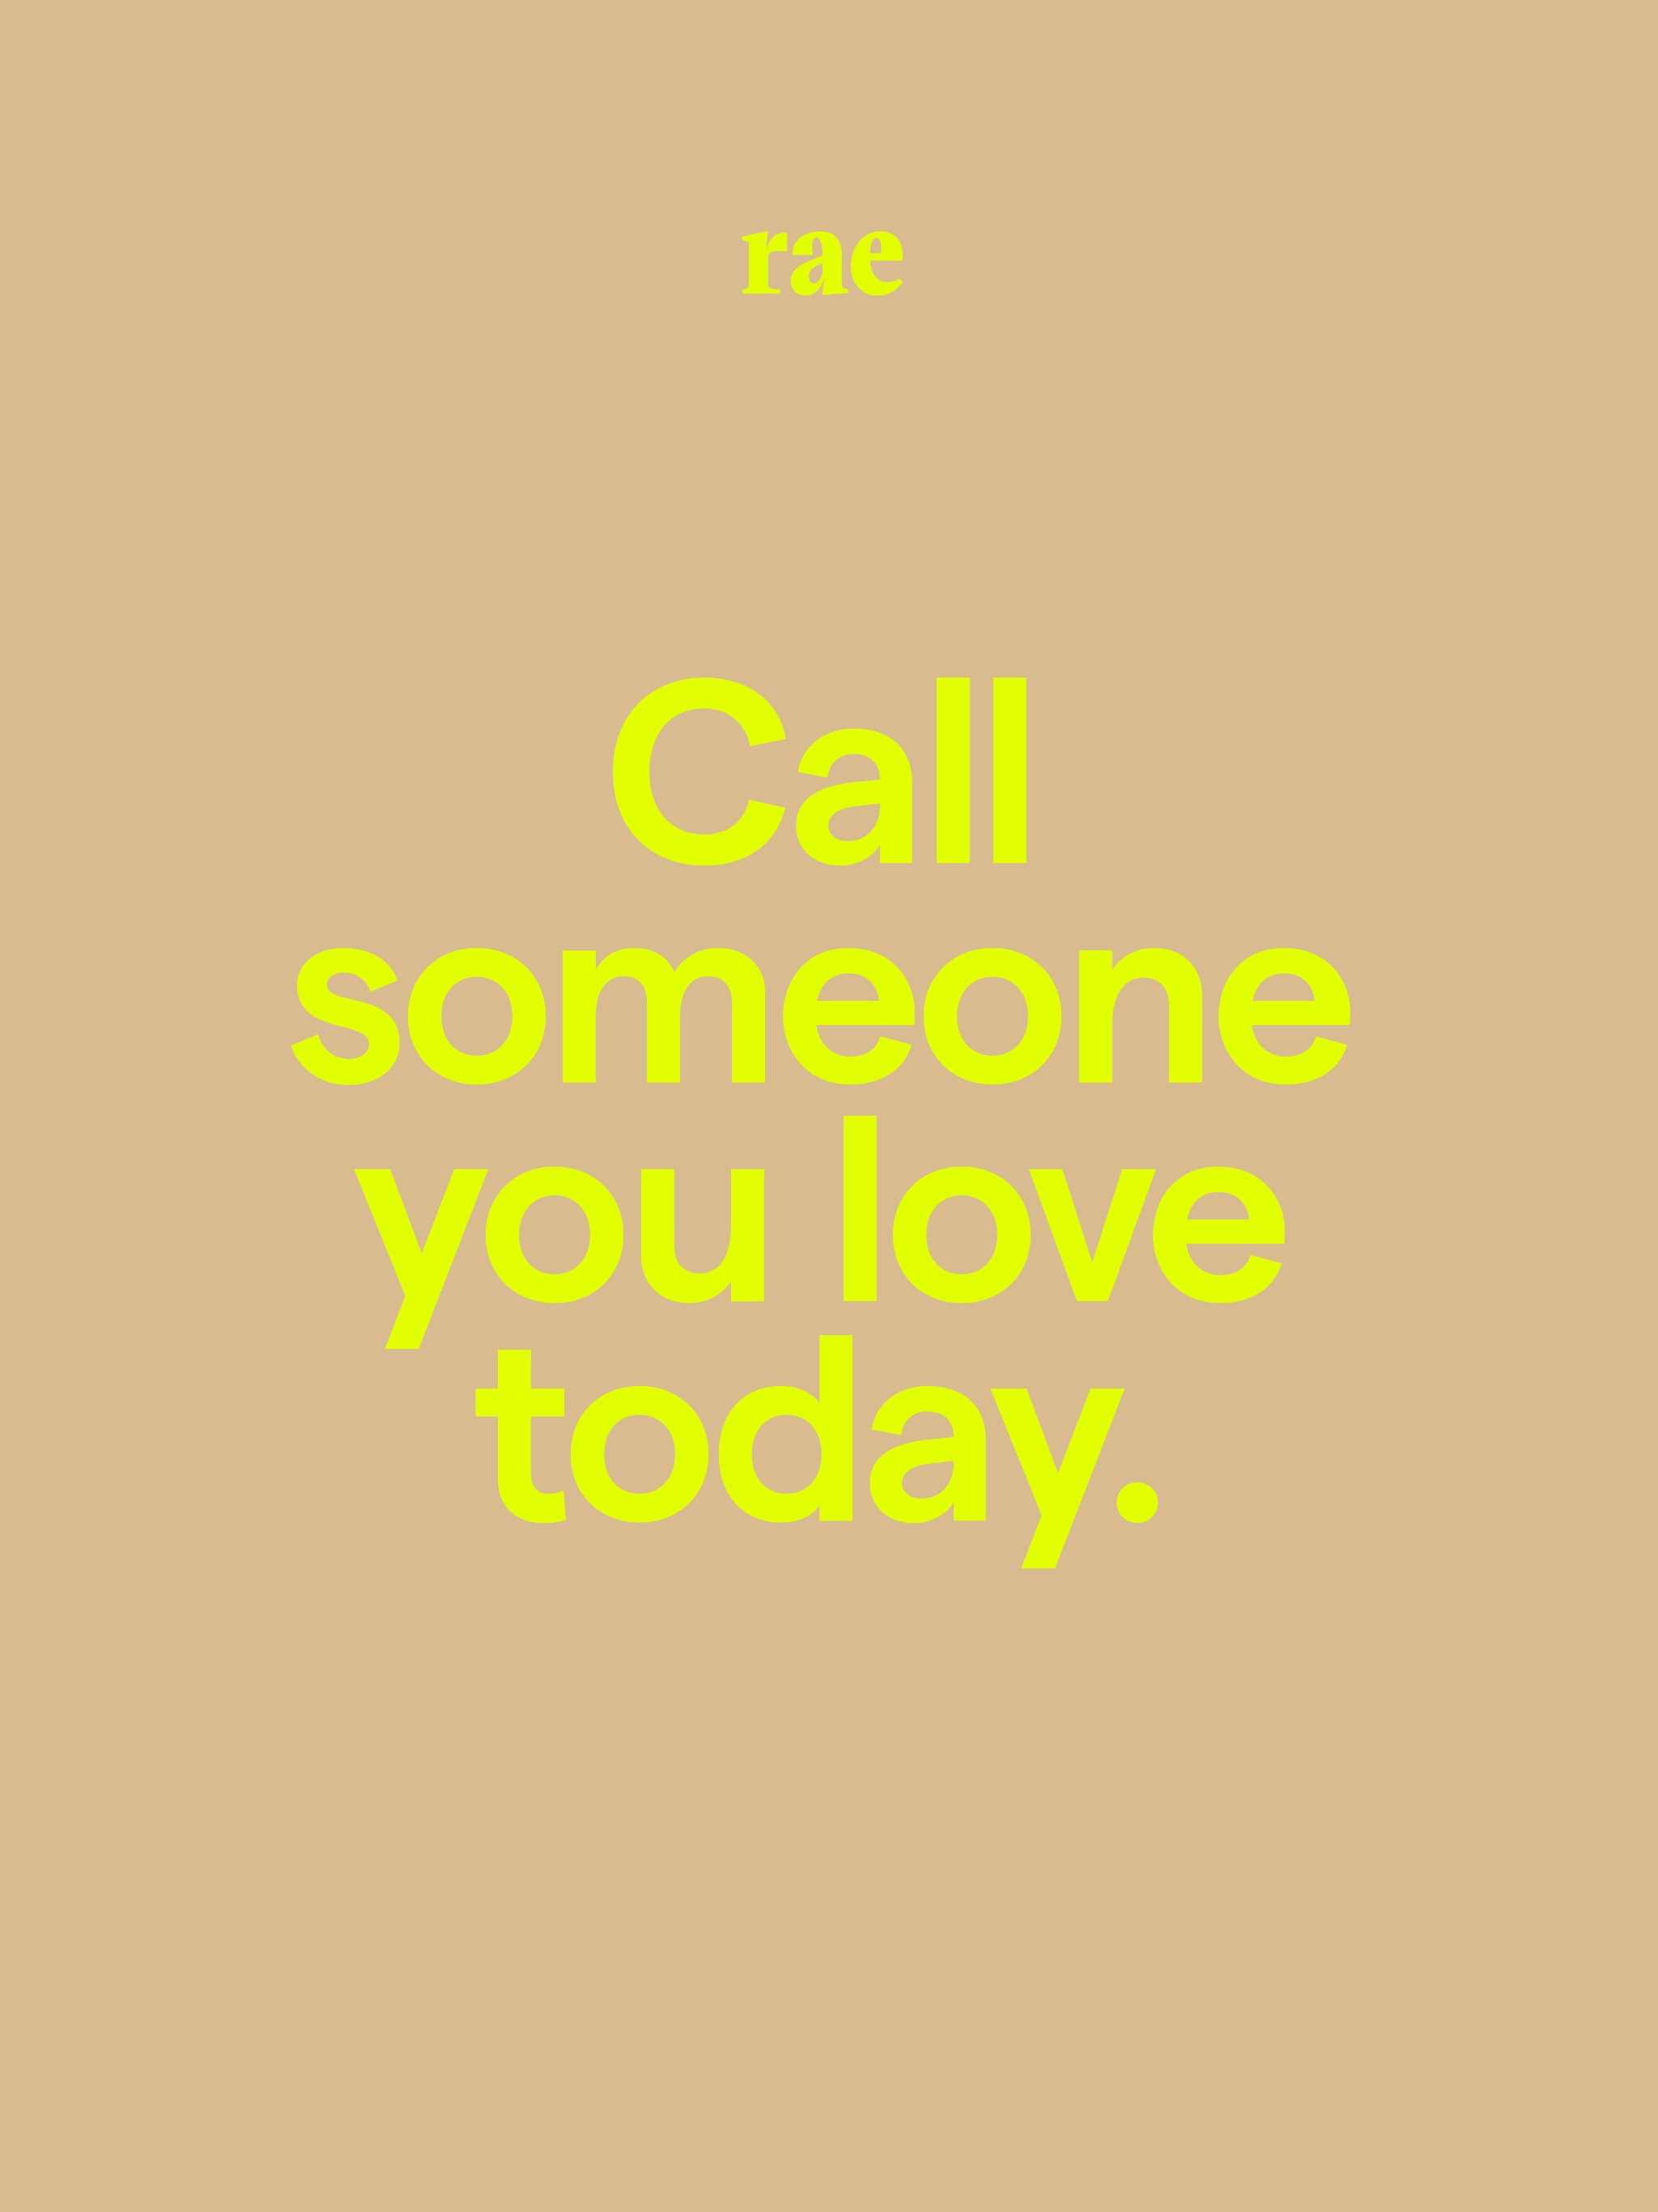 Call someone you love today_Tablet_Screensavers_1.jpg